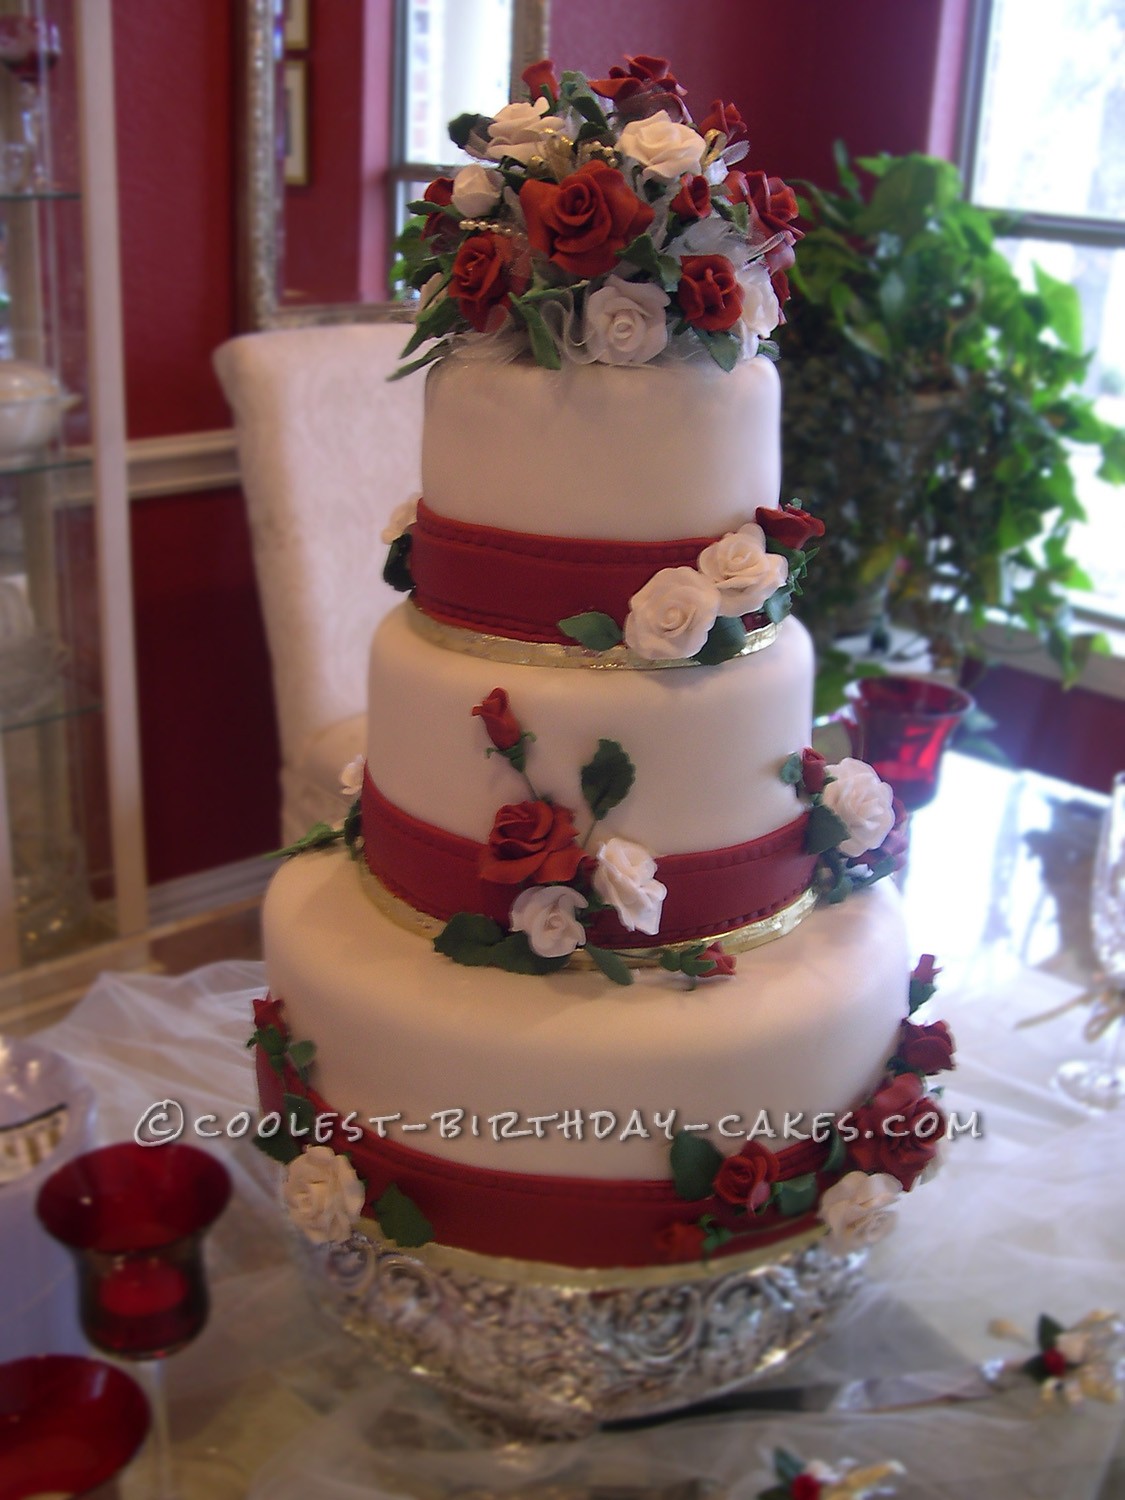 Coolest Red and White Rose Wedding Cake